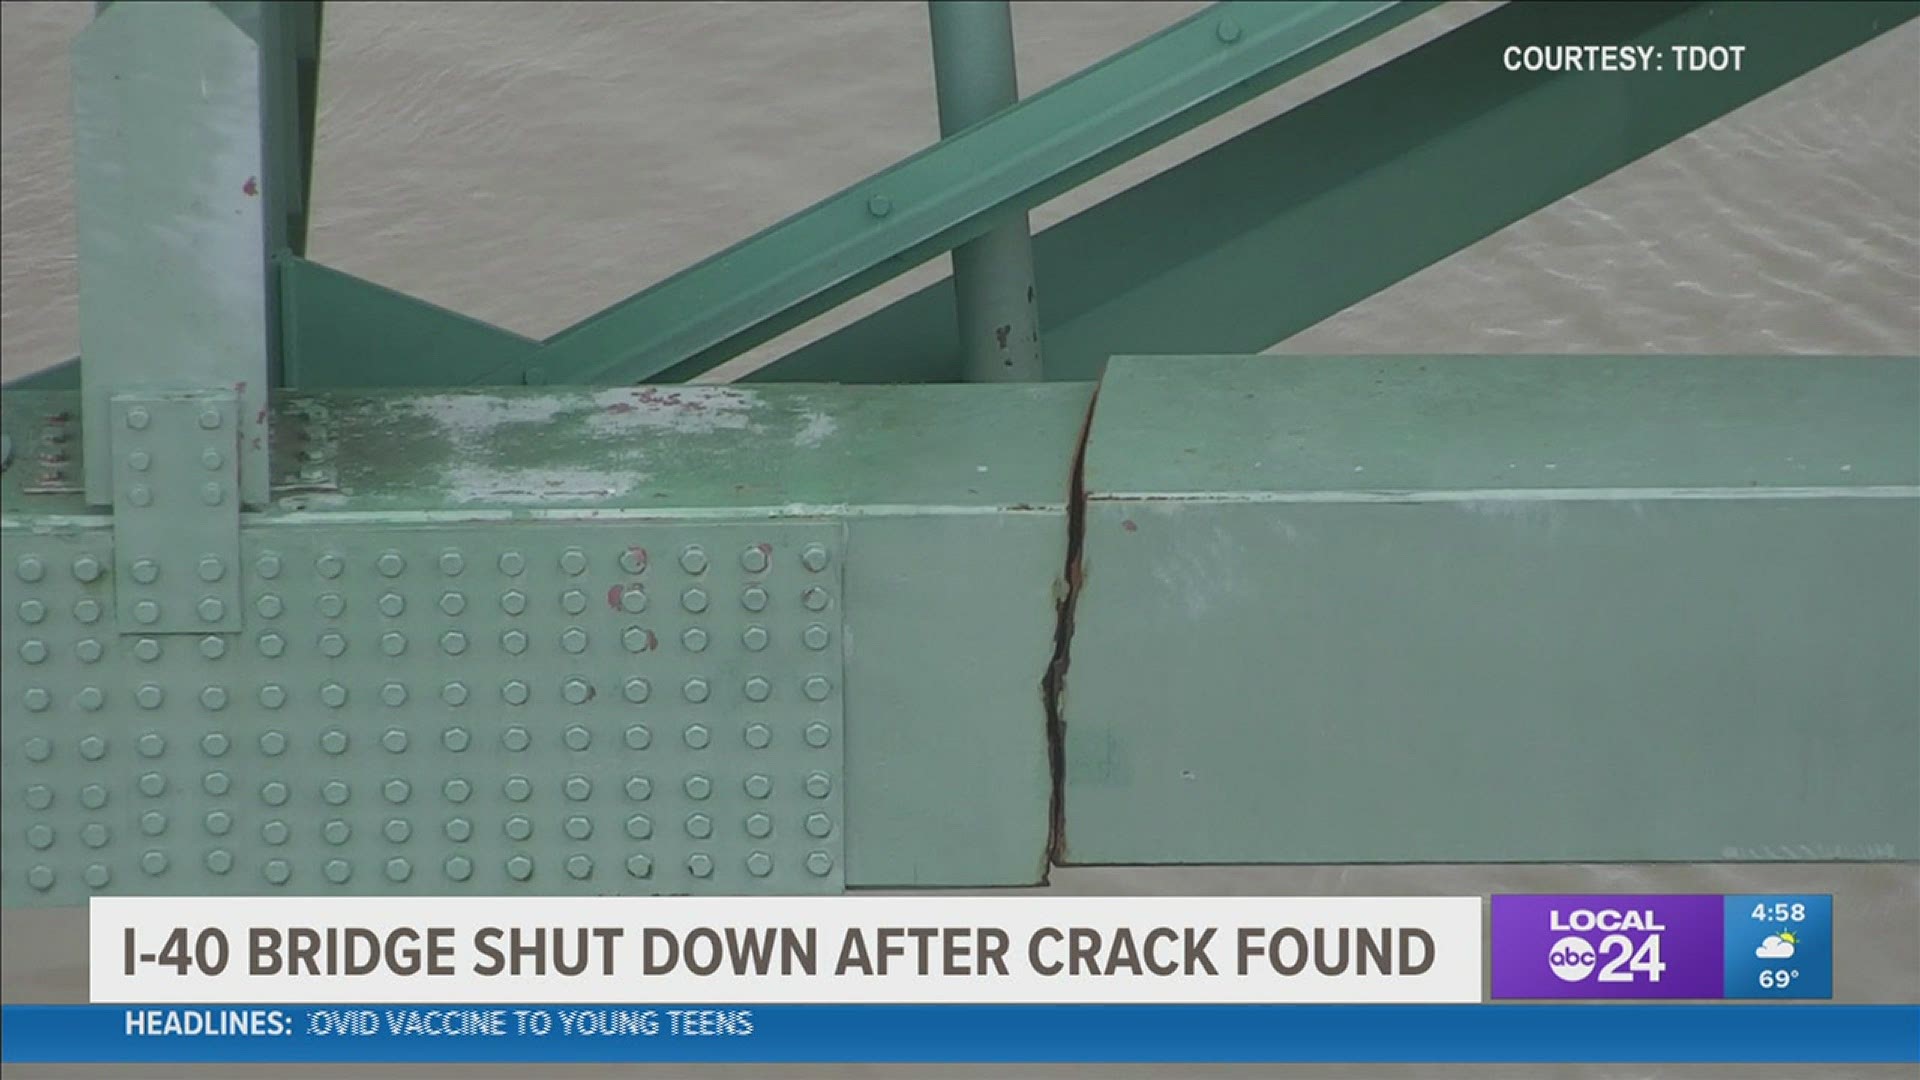 The bridge in Memphis carries more than 40,000 cars & trucks daily and is closed for further notice after inspection crew found large crack in one of its steel beams